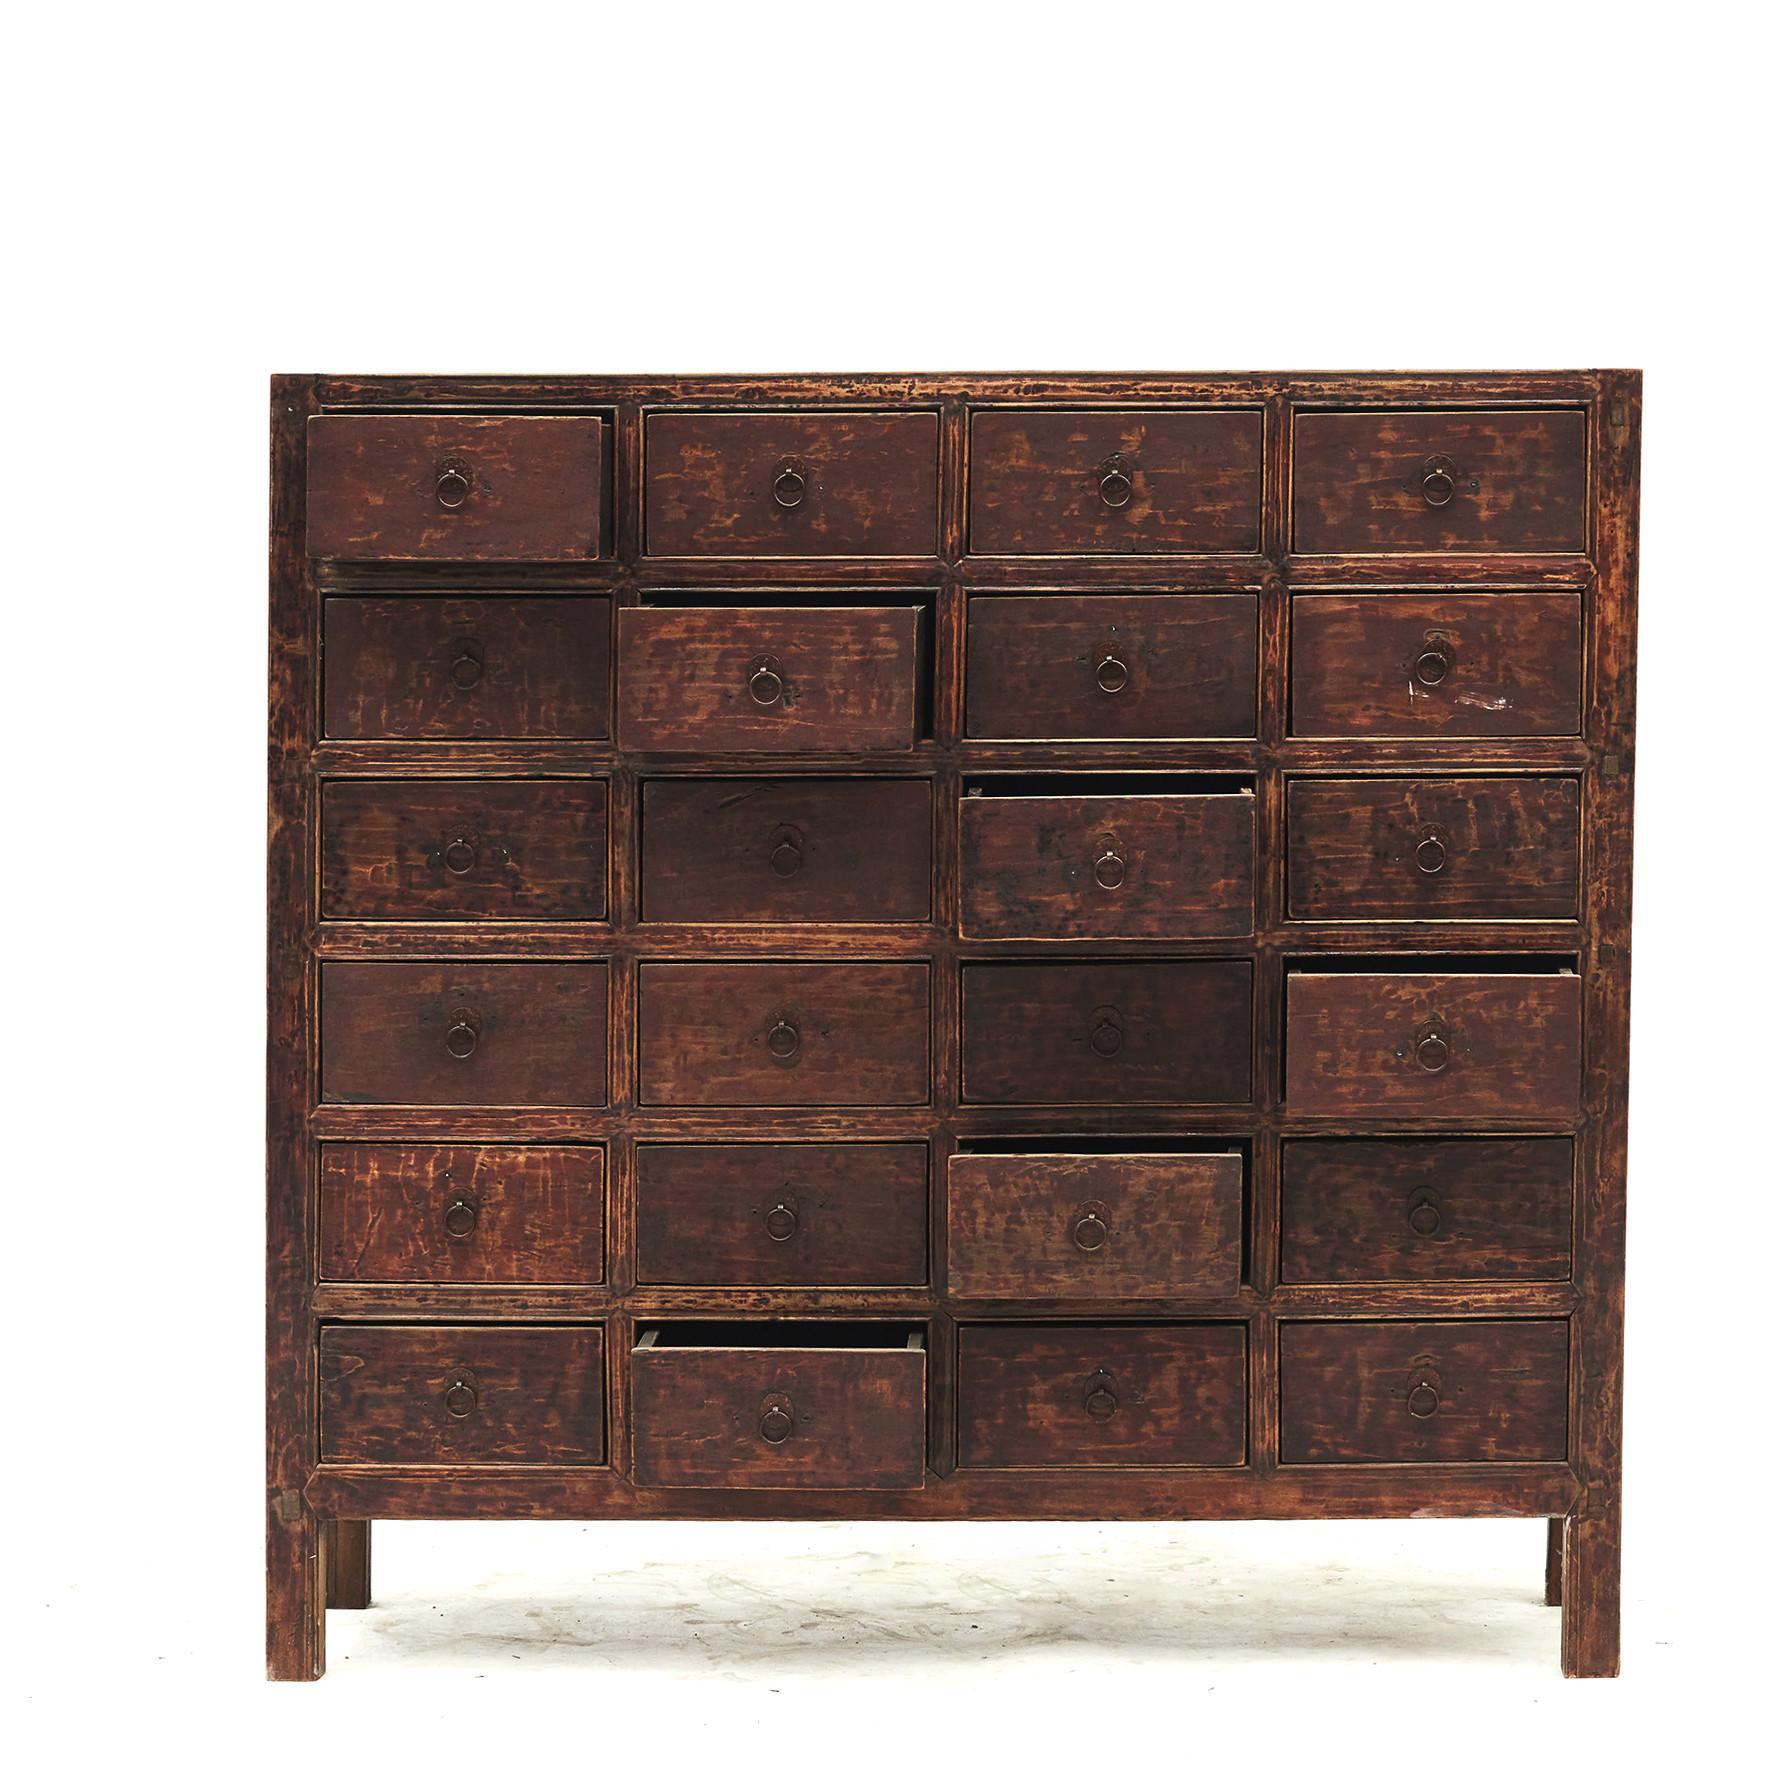 Chinese apothecary / pharmacy medicine chest with 24 drawers.
Linden wood (also called lime tree) and burgundy lacquer front with a natural age-related patina.
From Jiangsu Province, mid-19th century.
Drawer measures inside H 12, L 31, W 26